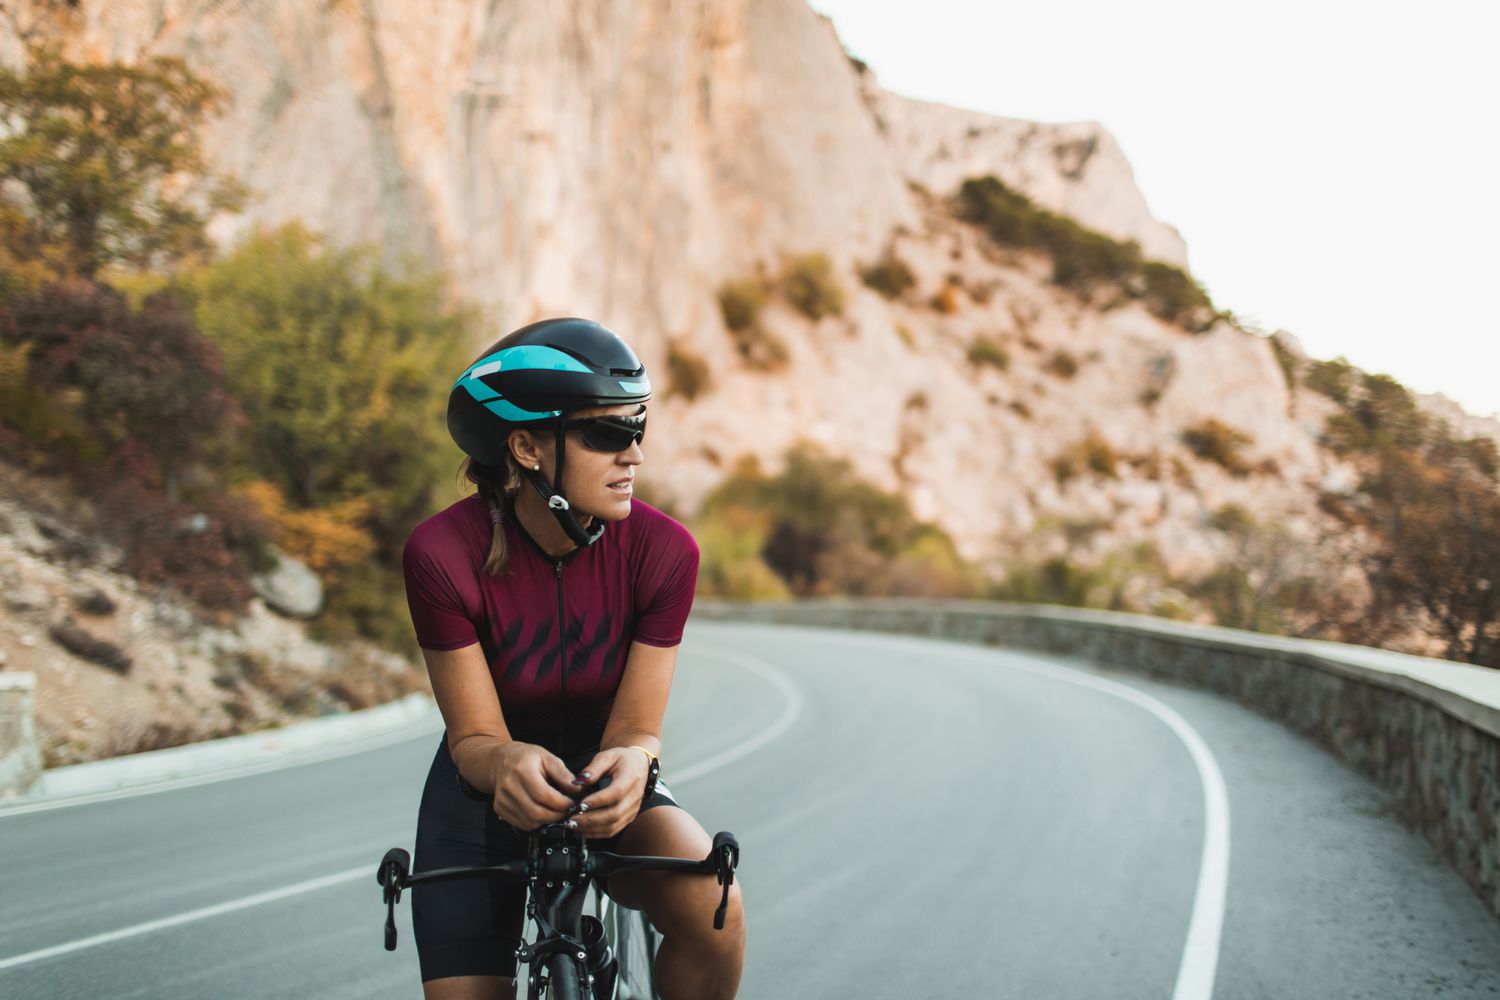 a cyclist posing on the cycle on a road wearing a helmet and sunglasses